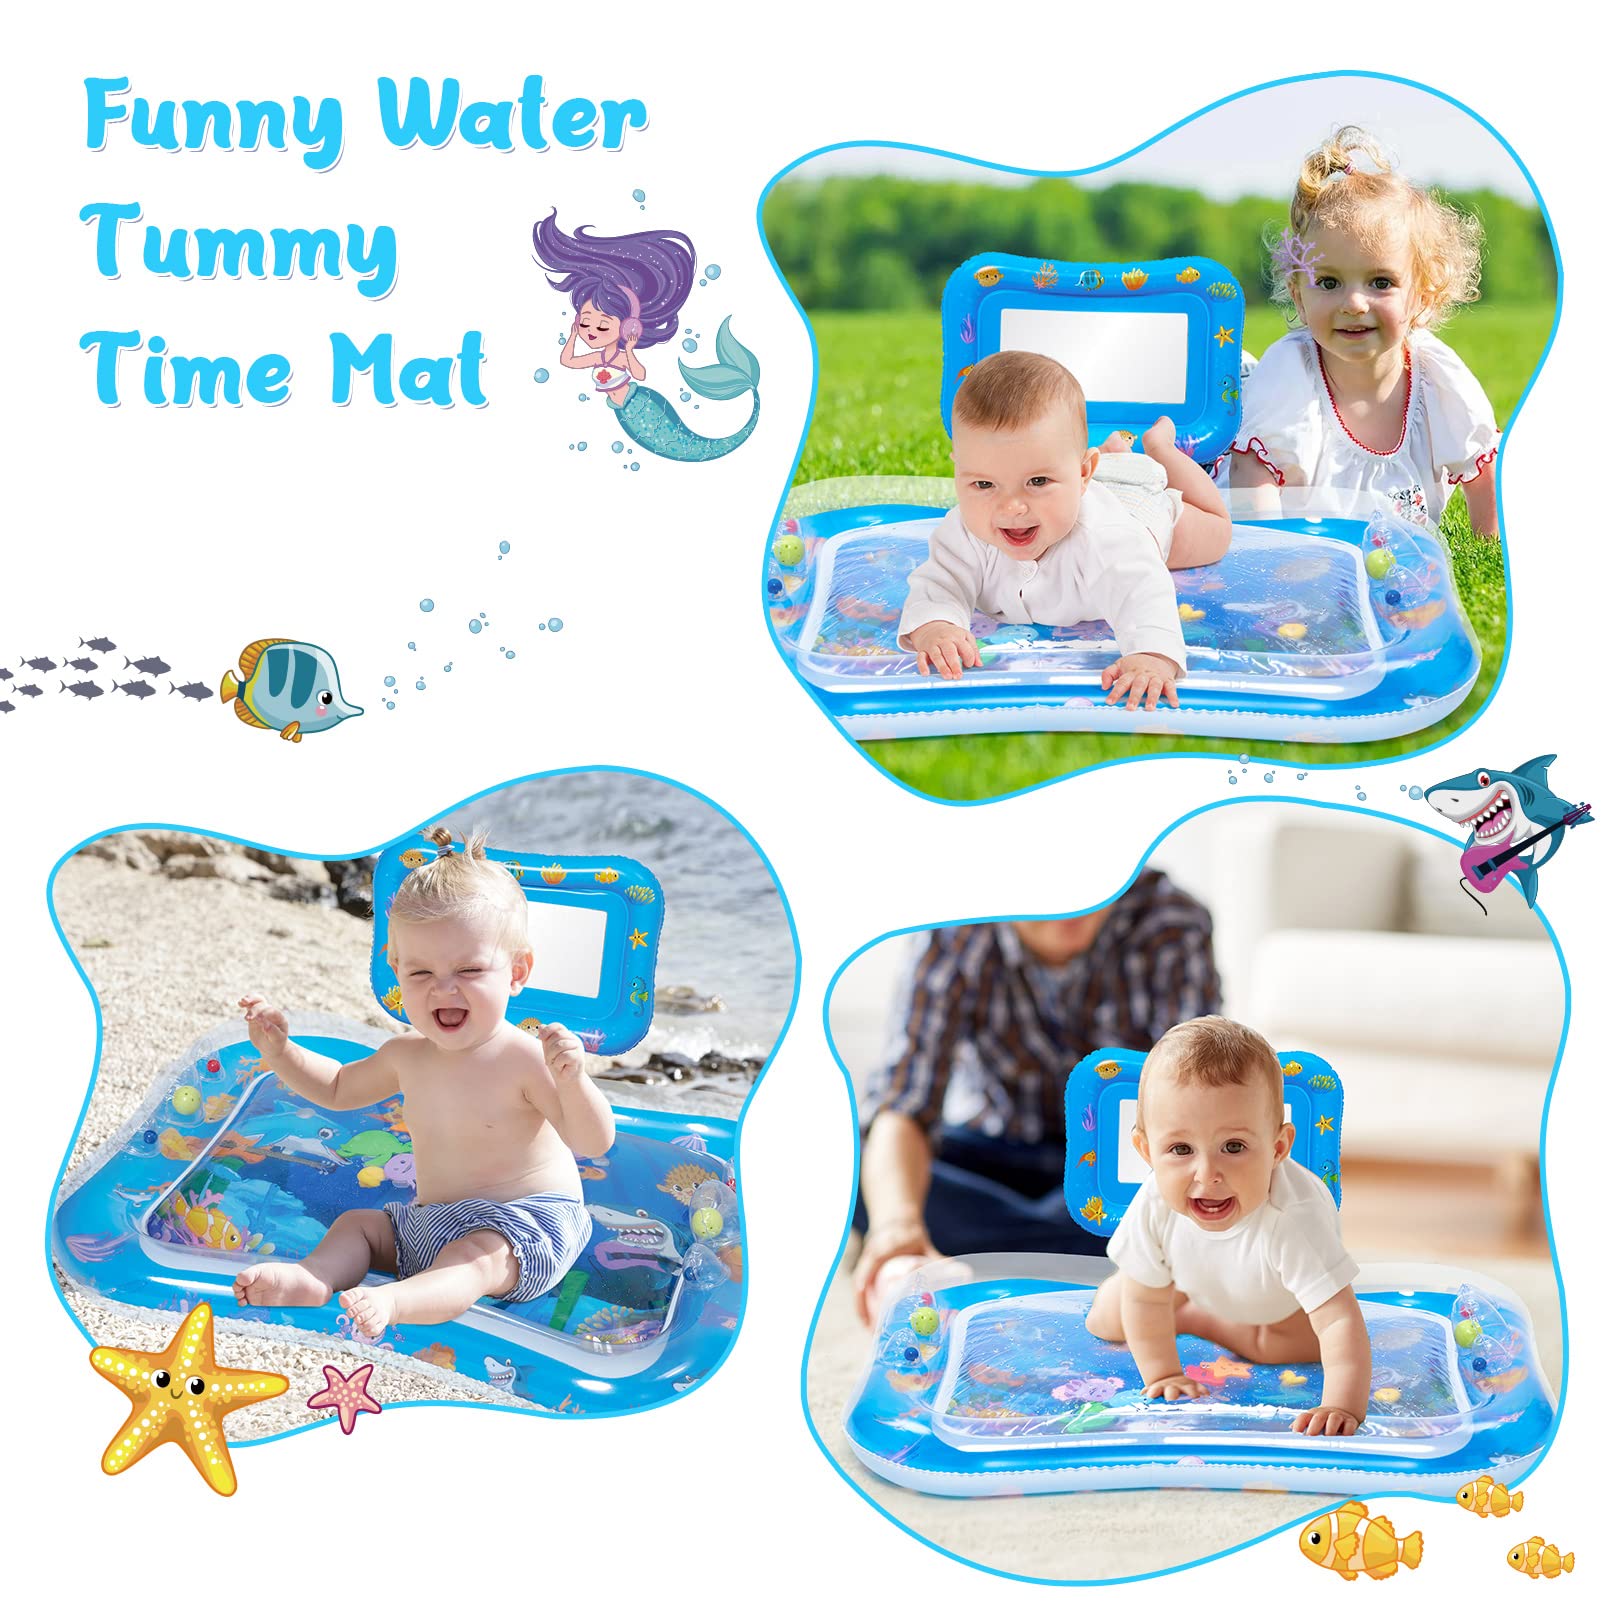 RONIPIC Tummy Time Water Mat with Mirror and Rattles,XL Inflatable Water Mat for Babies Infants Toddlers, The Perfect Fun Time Play Activity Center Teething Toys for 3 6 9 12 Month Baby Boy Girl